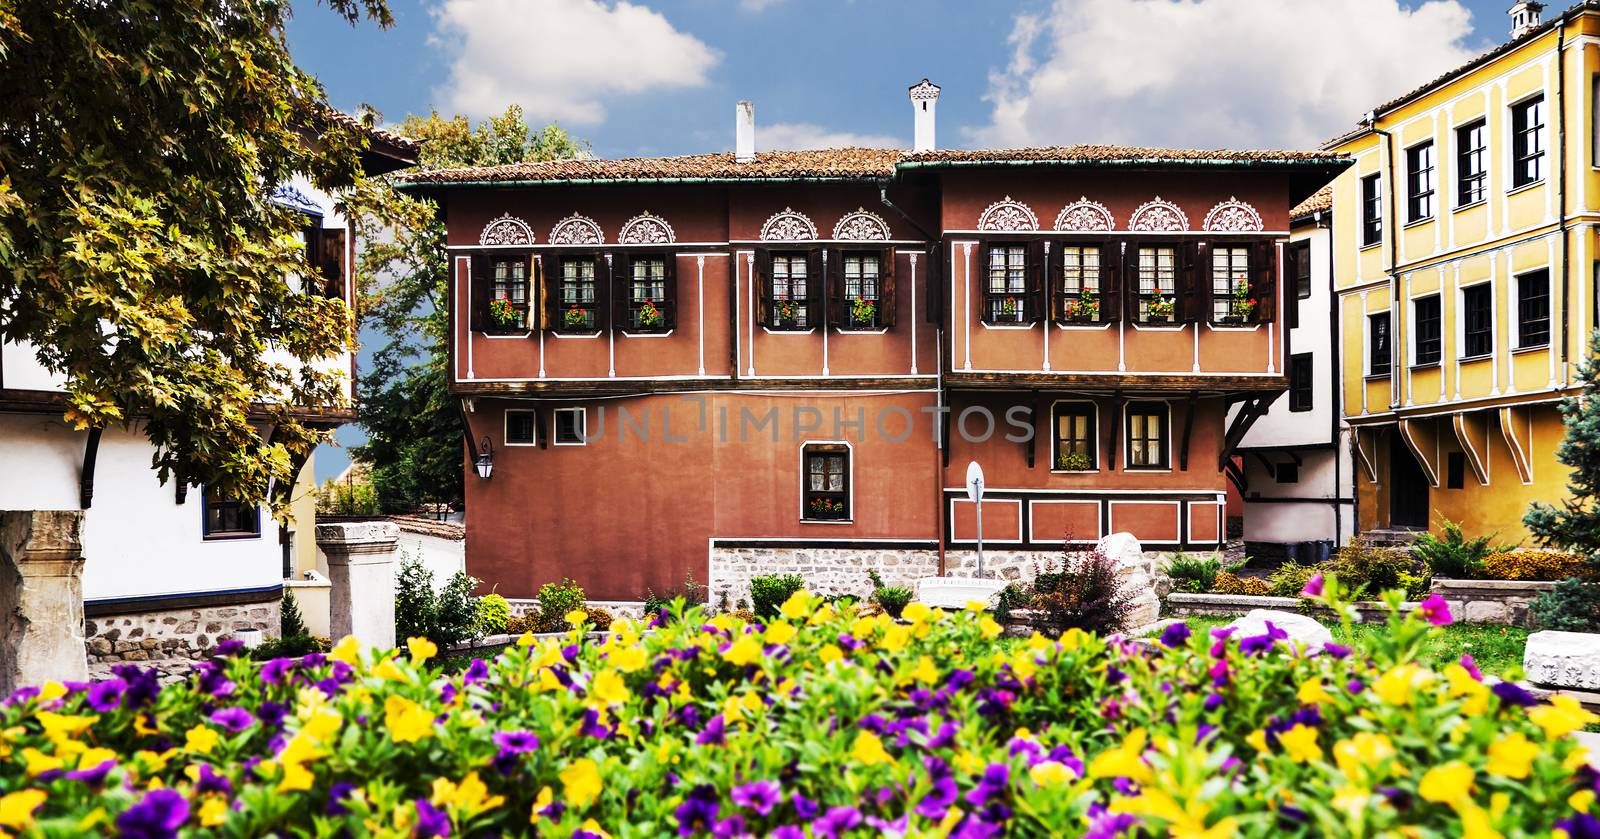 Old houses, cultural heritage in old town Plovdiv, Bulgaria with blooming flowers in foreground.